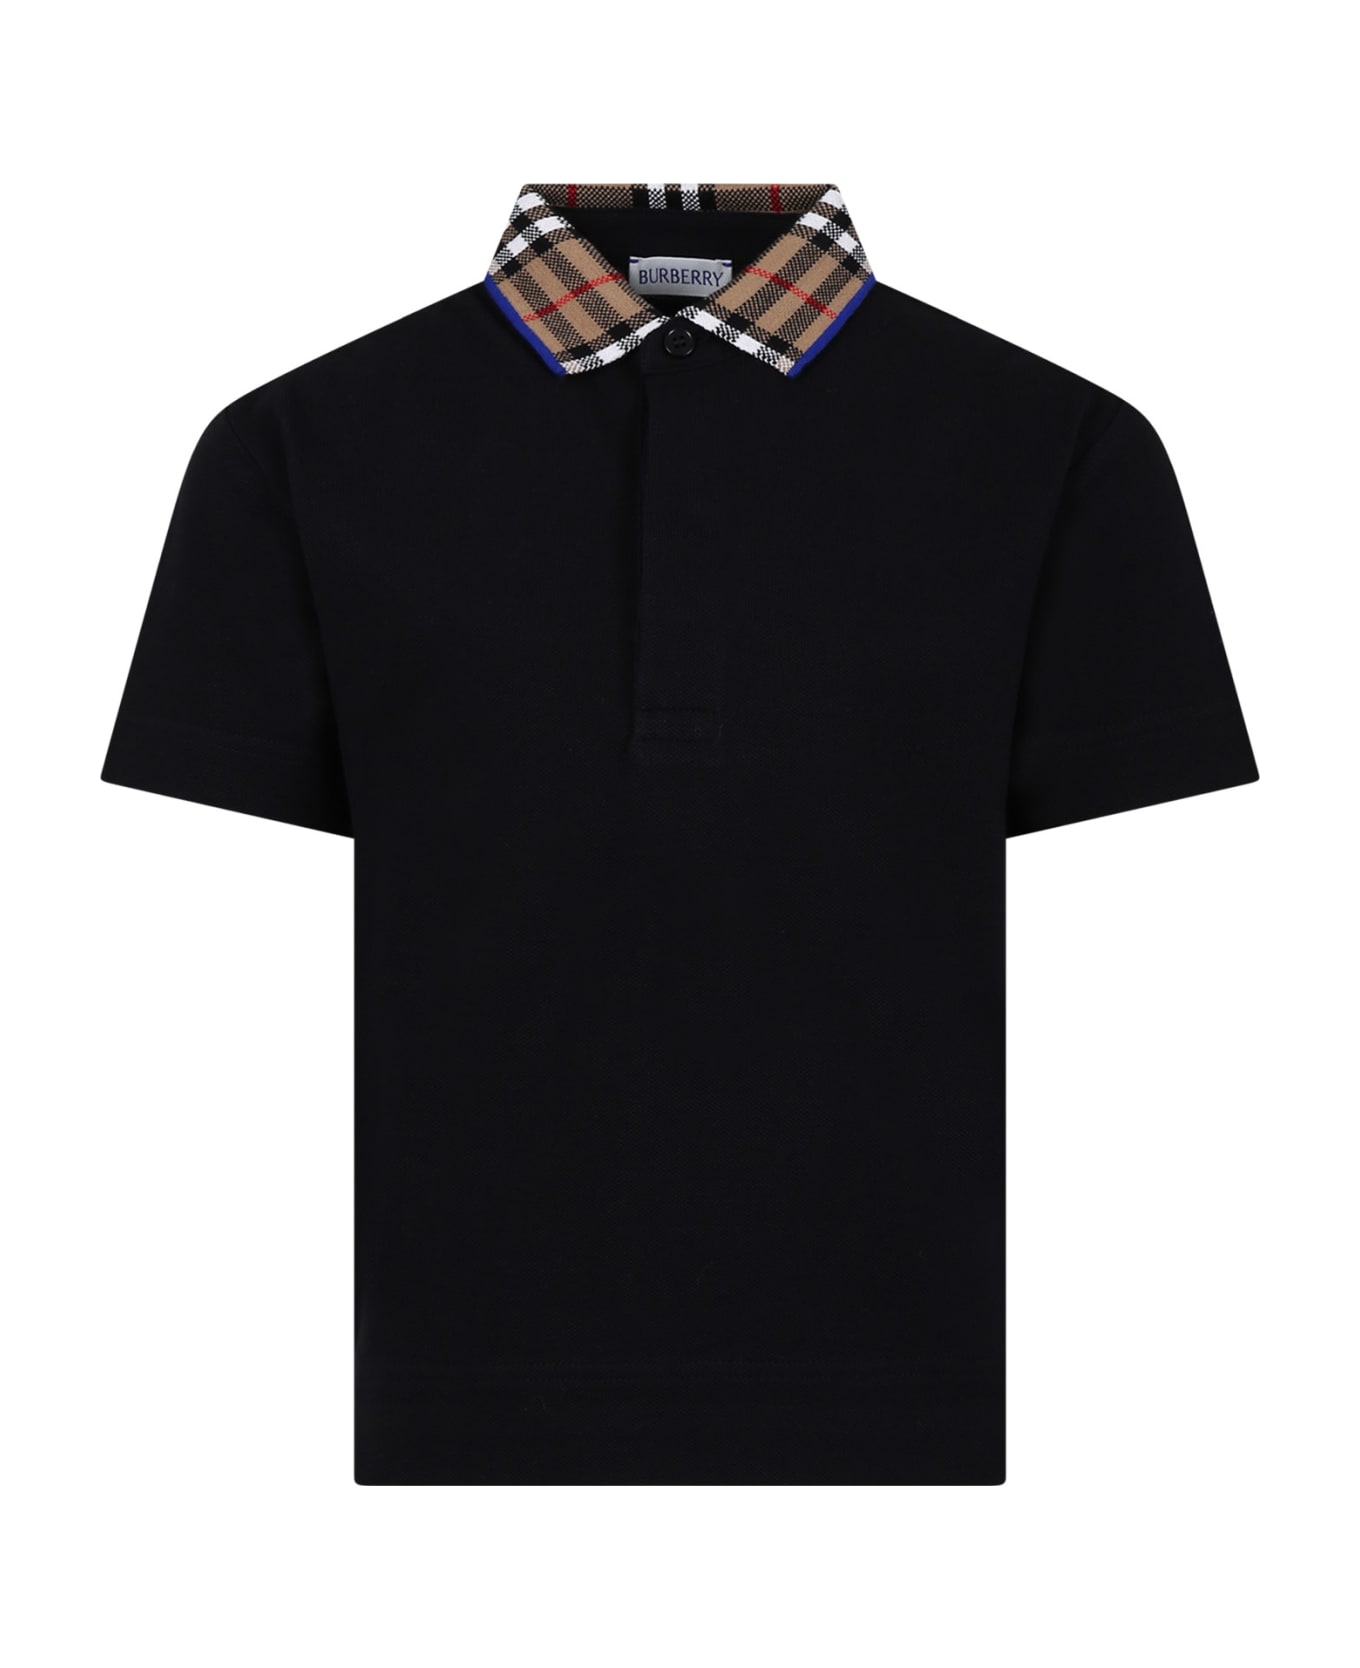 Burberry Black Polo Shirt For Boy With Vintage Check On The Collar - Black